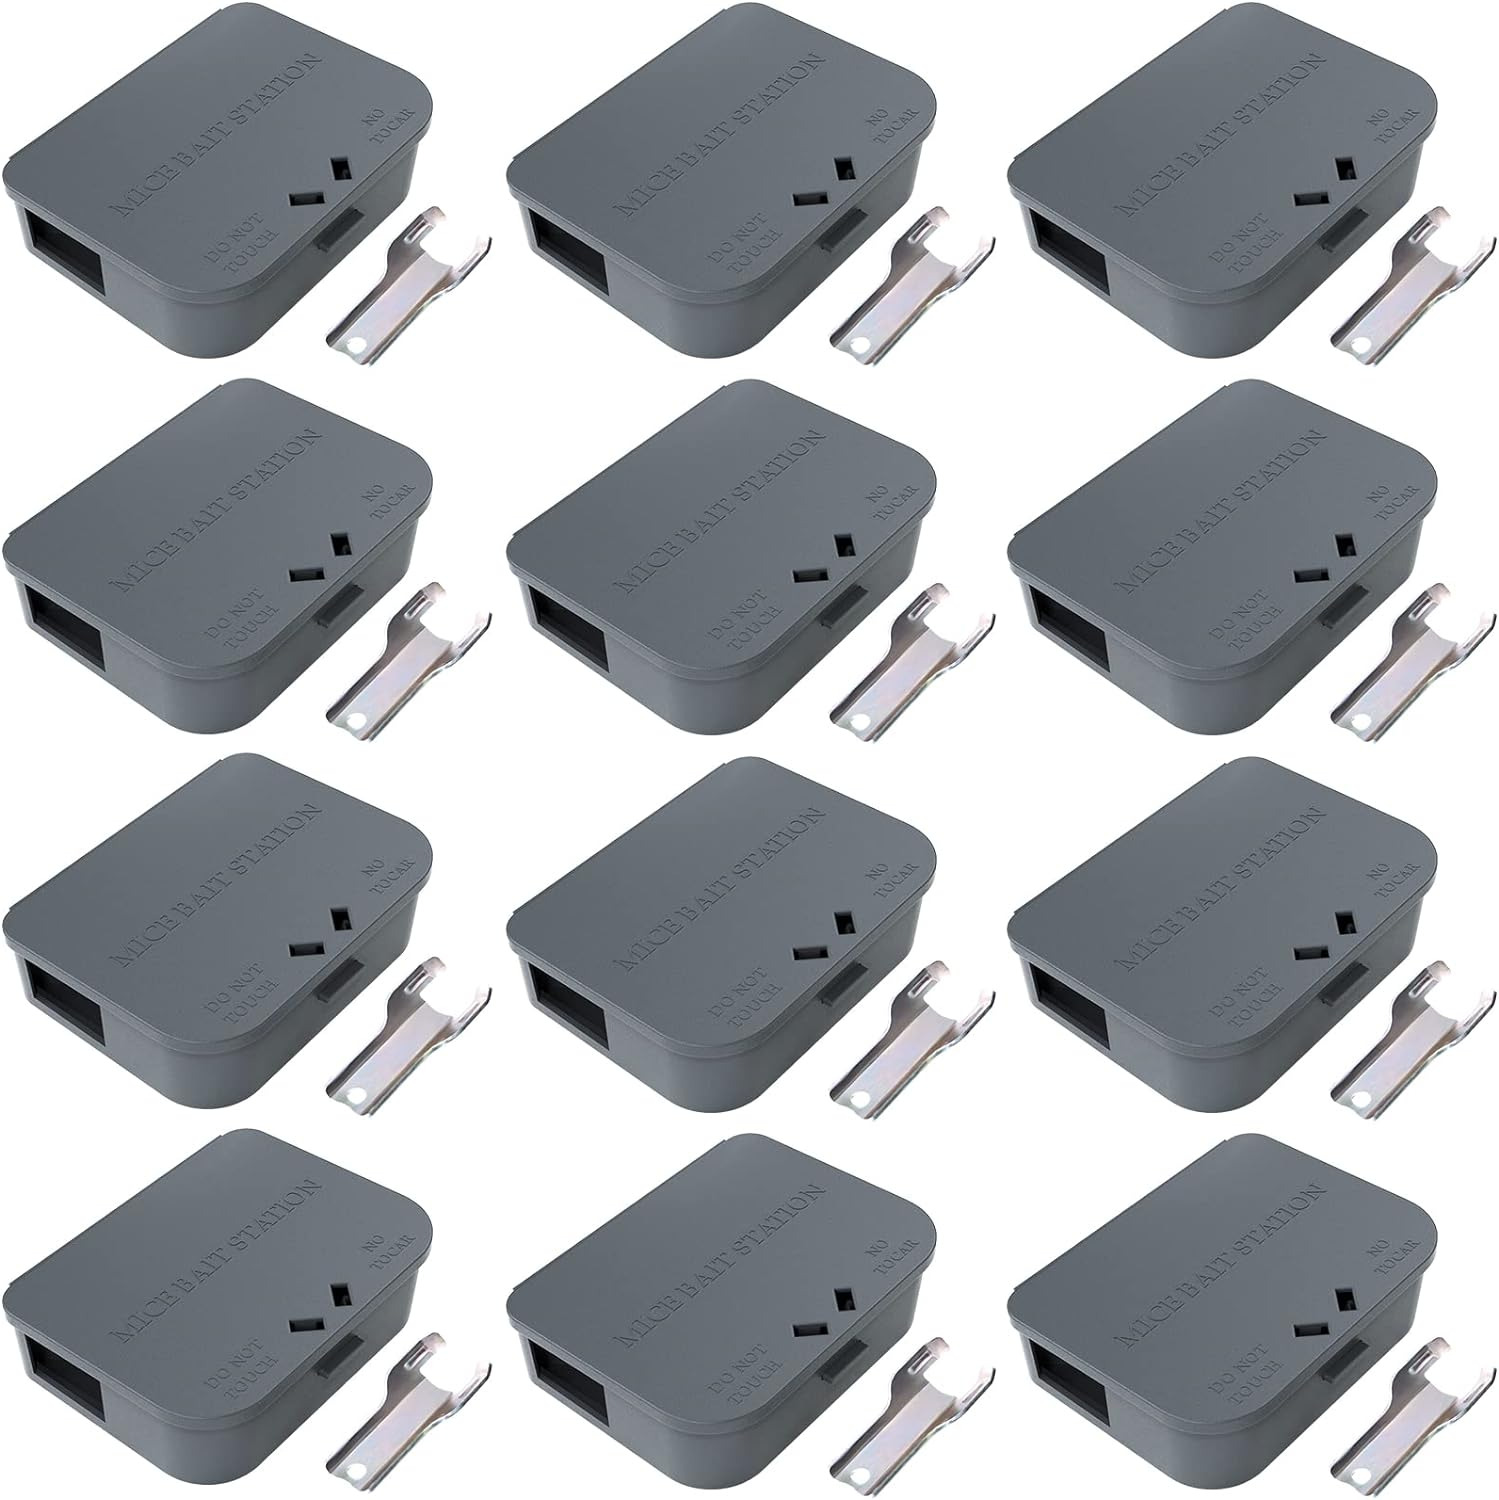 Mouse Stations with Keys 12 Pack, Keyless Design and Key Required